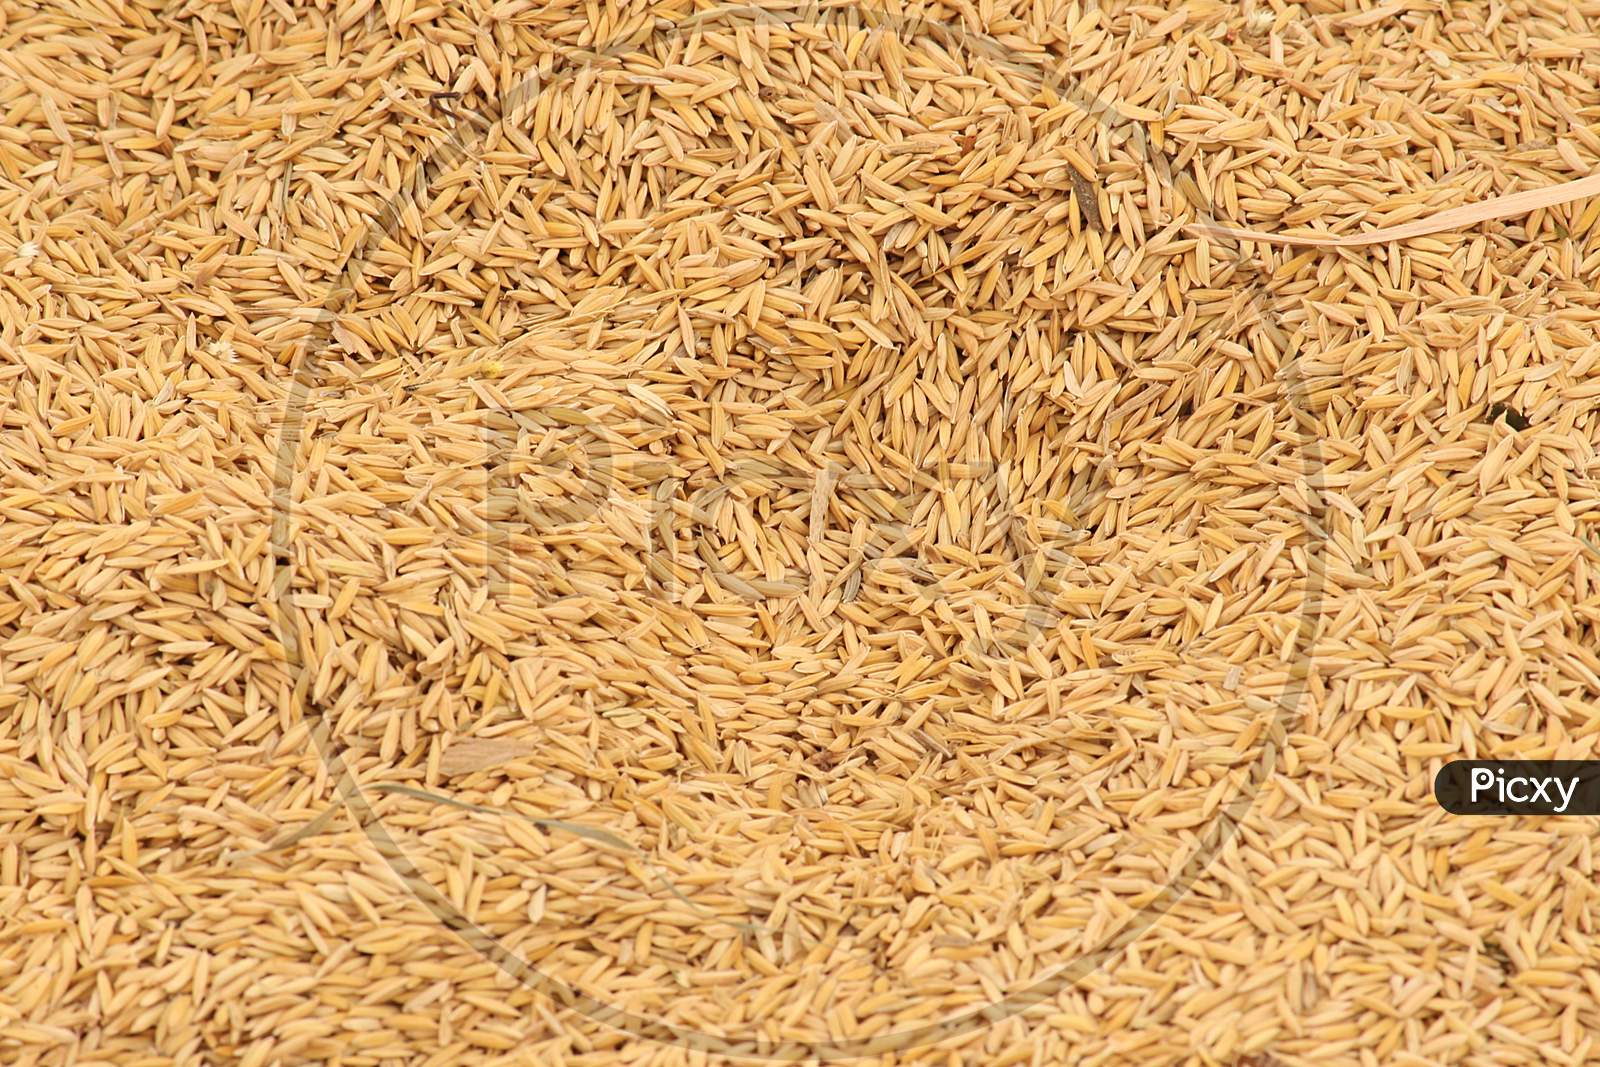 Rice harvest final output ready to sale